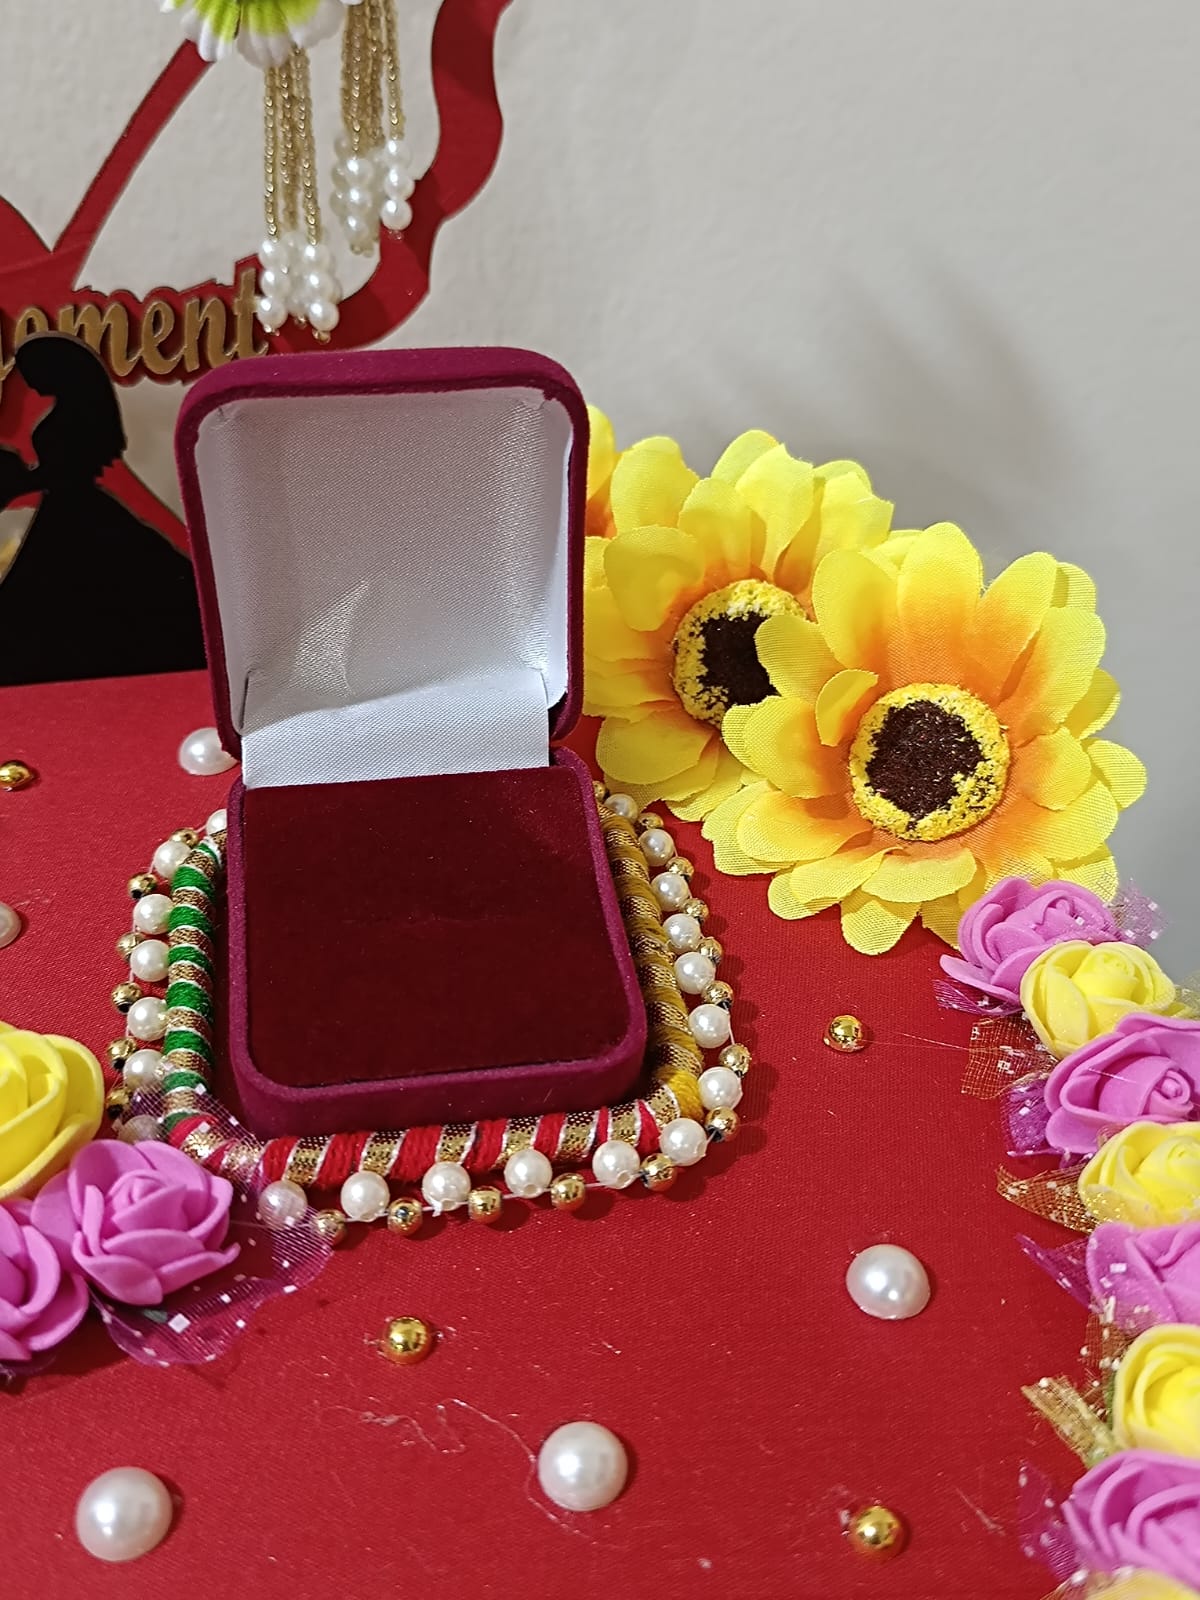 Buy CREATIVE HANDICRAFT Engagement ring platter , decorative ring plate,ring  plate with flower,new designs of ring platter,handmade plate for  engagement,rakhi plate,thali for wedding,glass ring platter,ring ceremony  (size-9 inch) Online at Low Prices